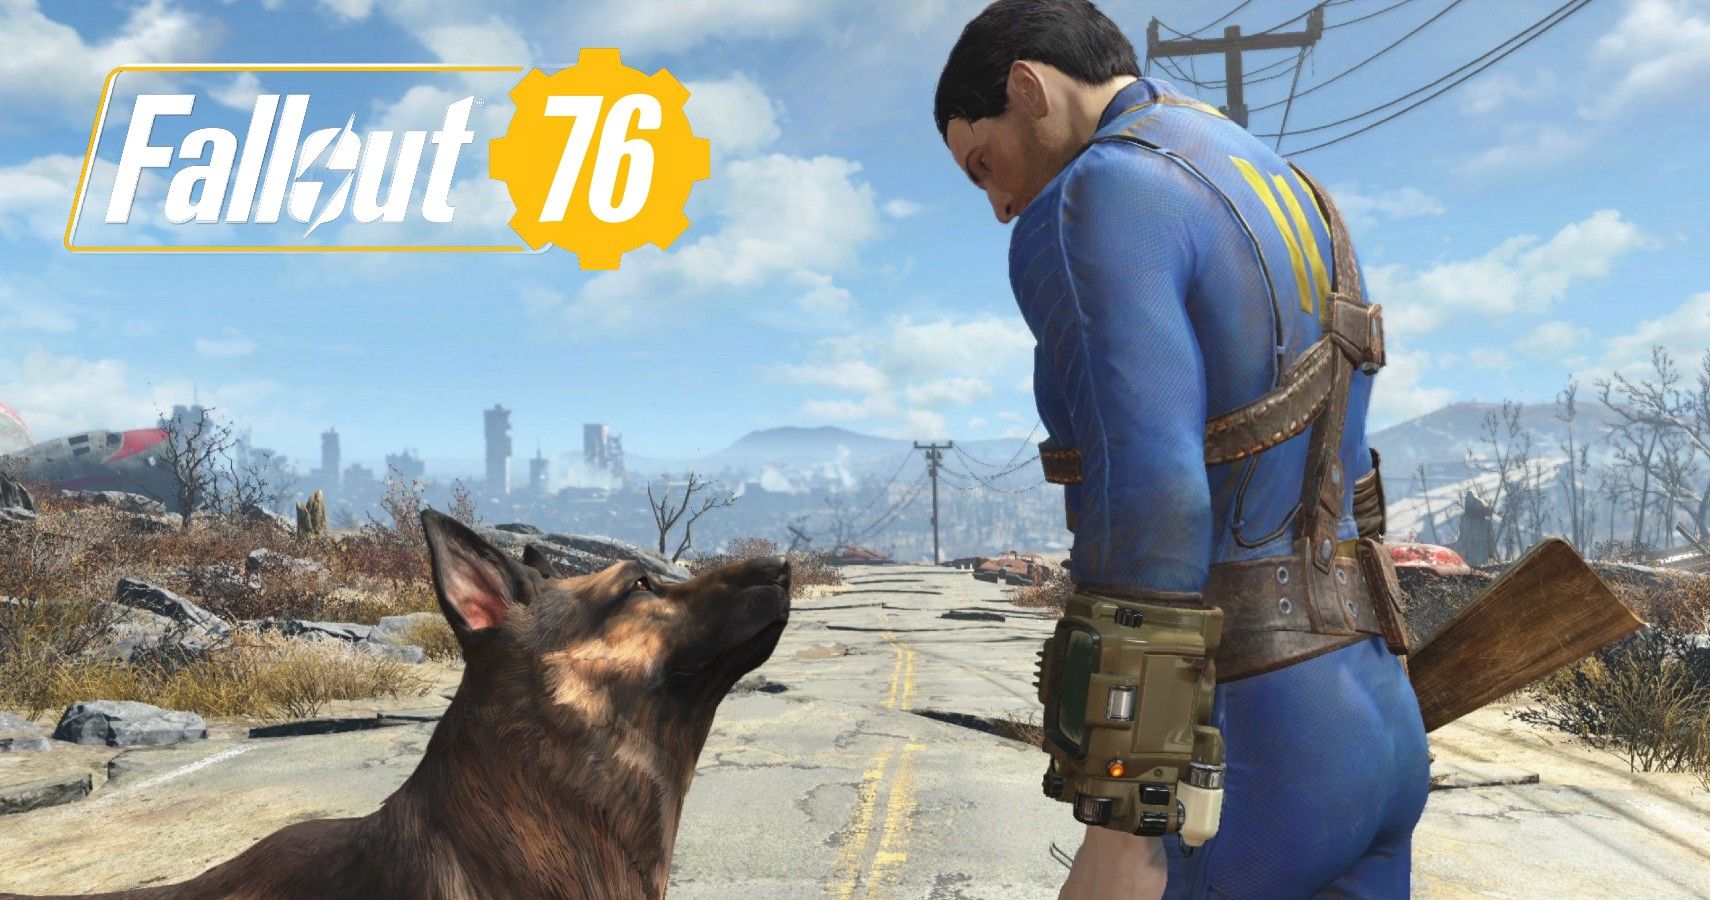 Lone Survivor and Dog with Fallout 76 Overlay - Fallout 4